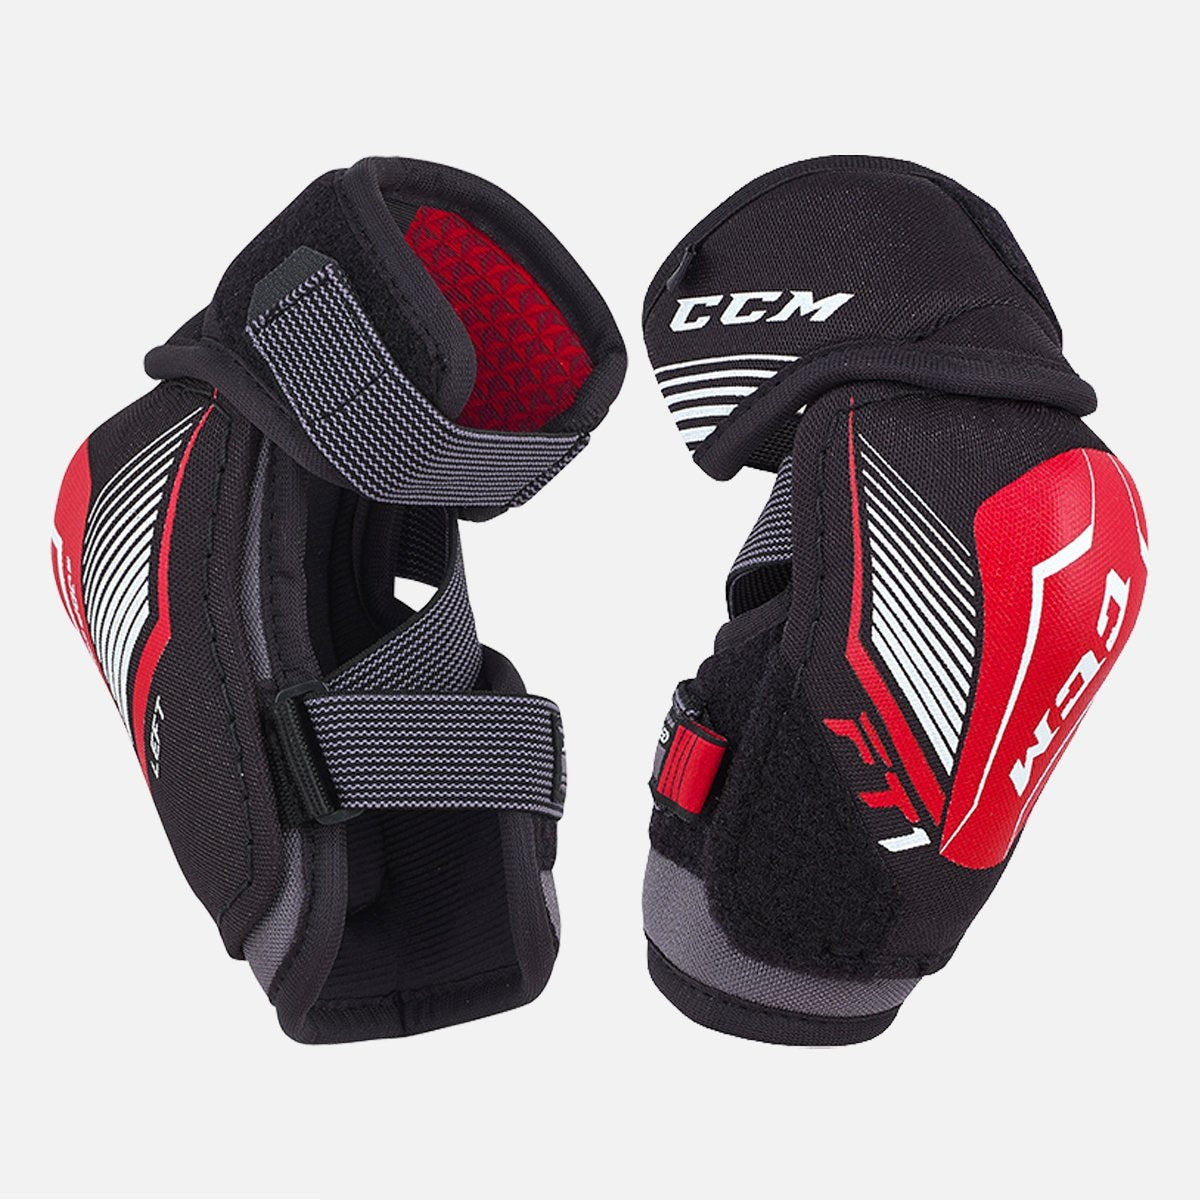 CCM Jetspeed FT1 Youth Elbow Pads